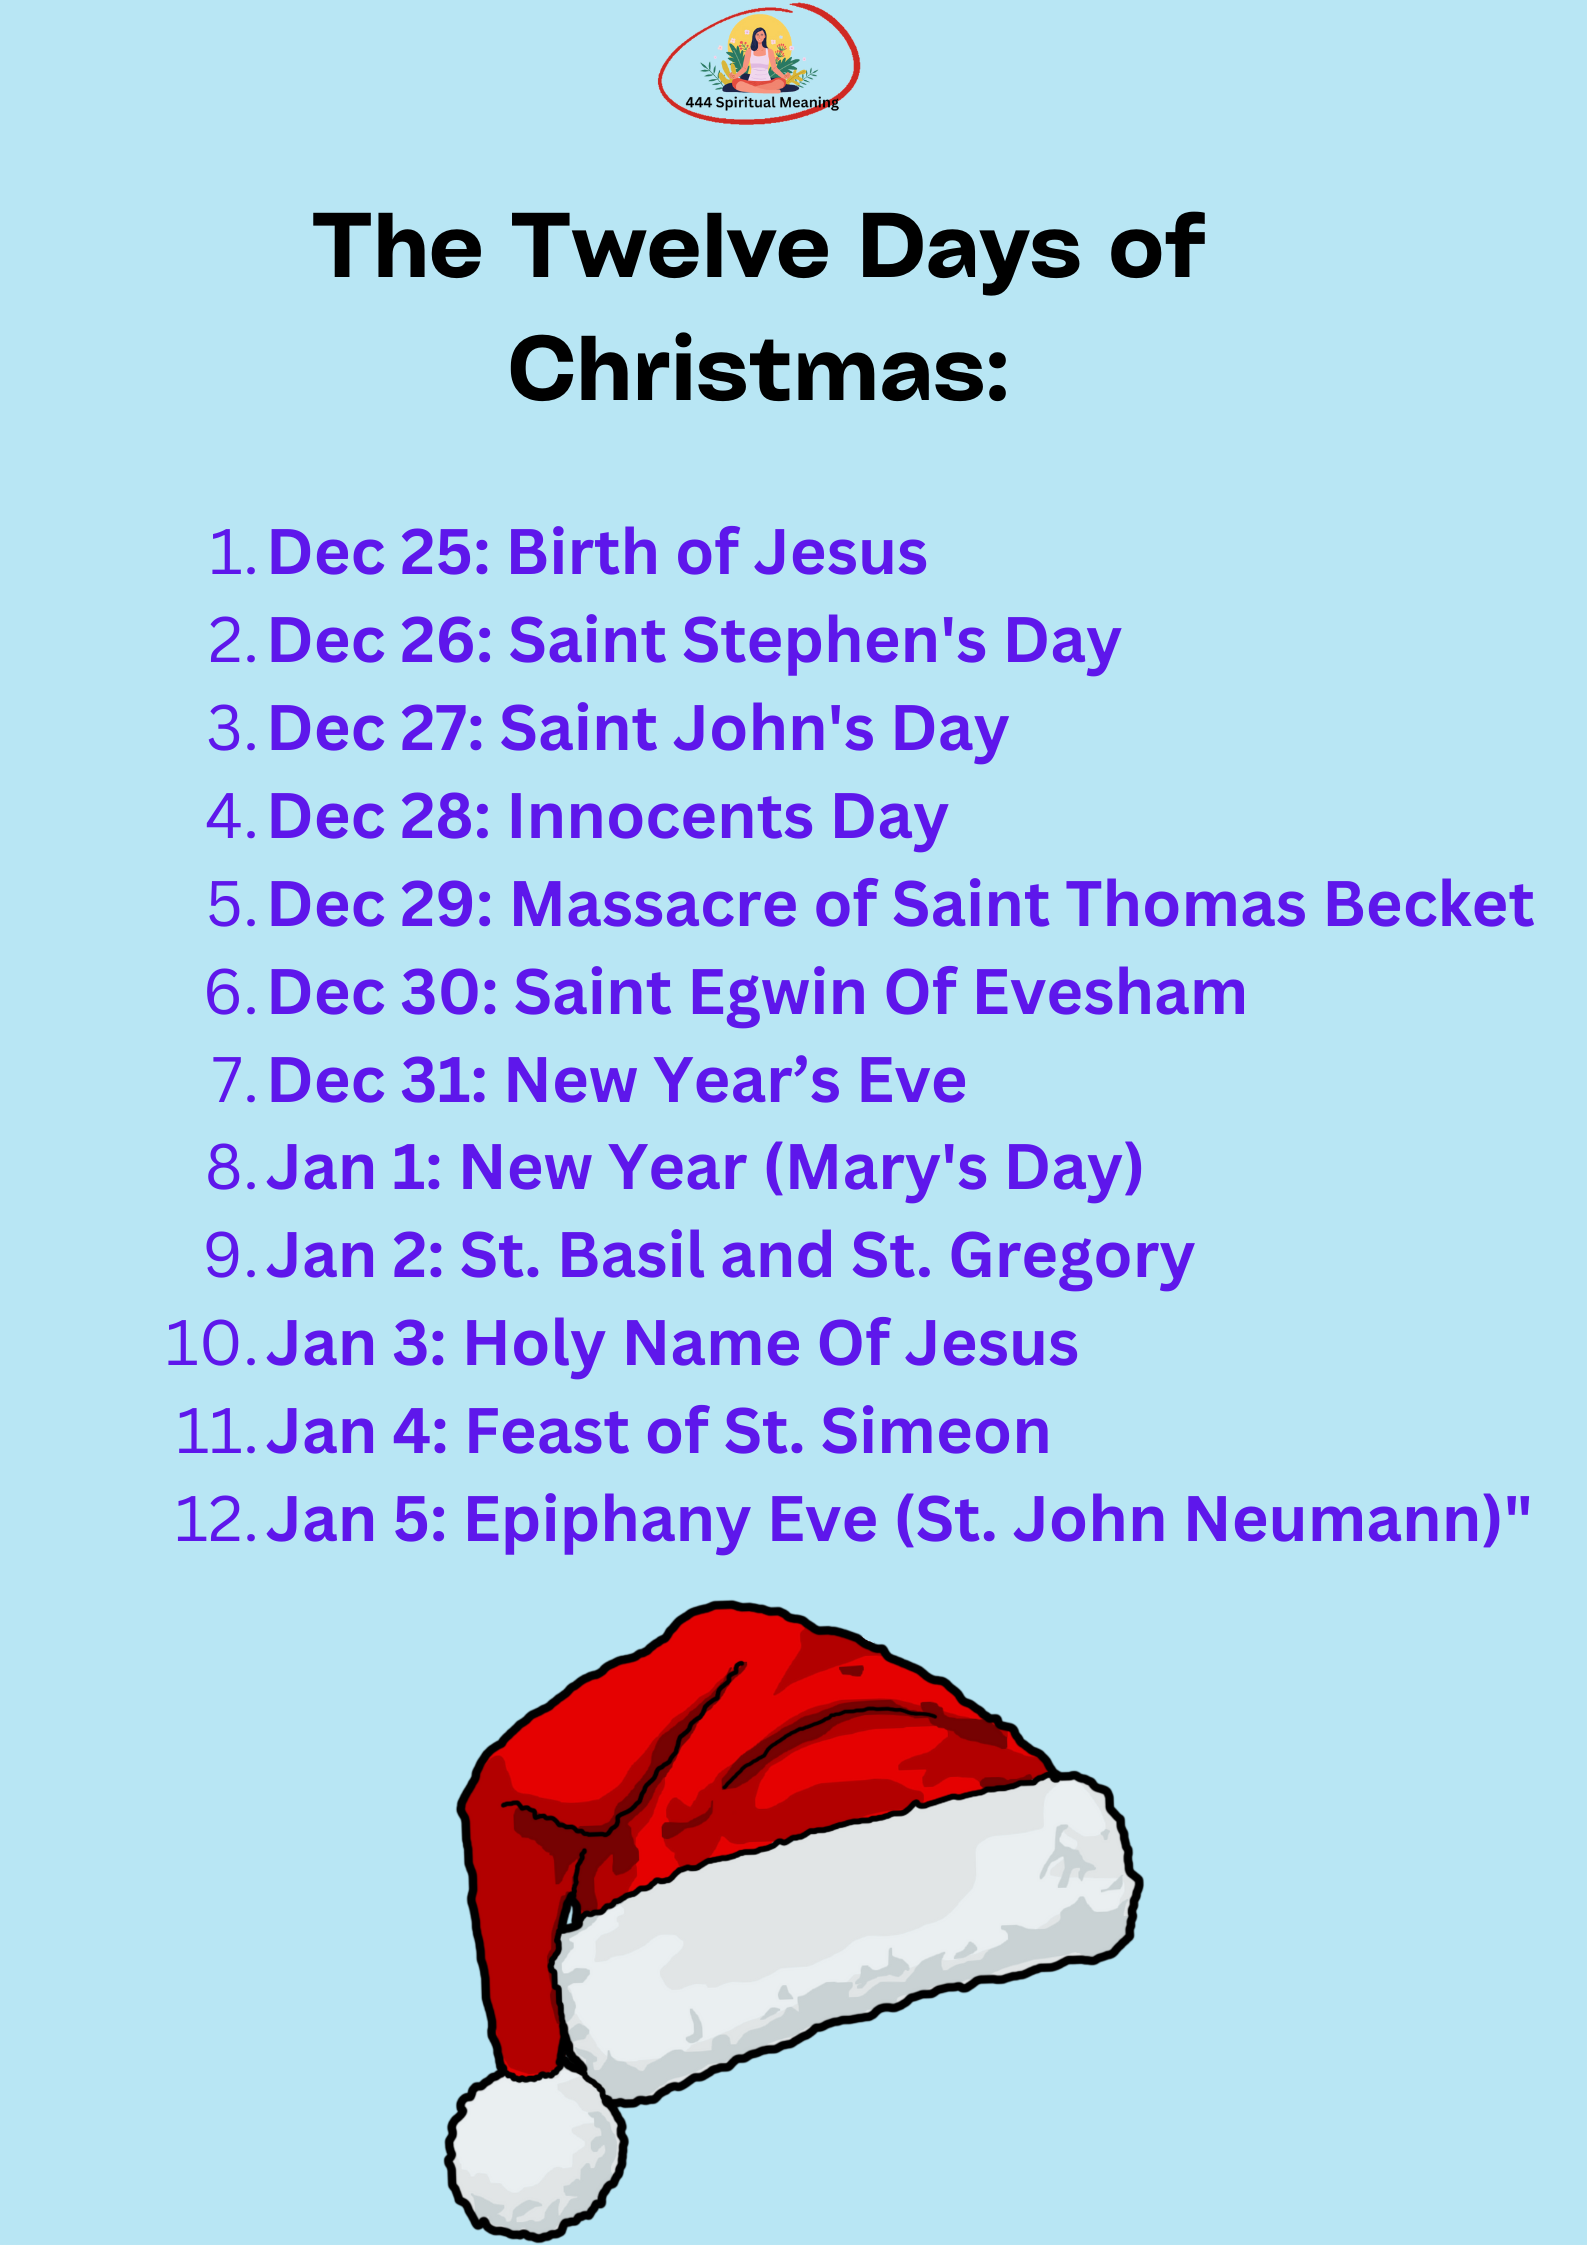 The Twelve Days of Christmas explains each day with reason